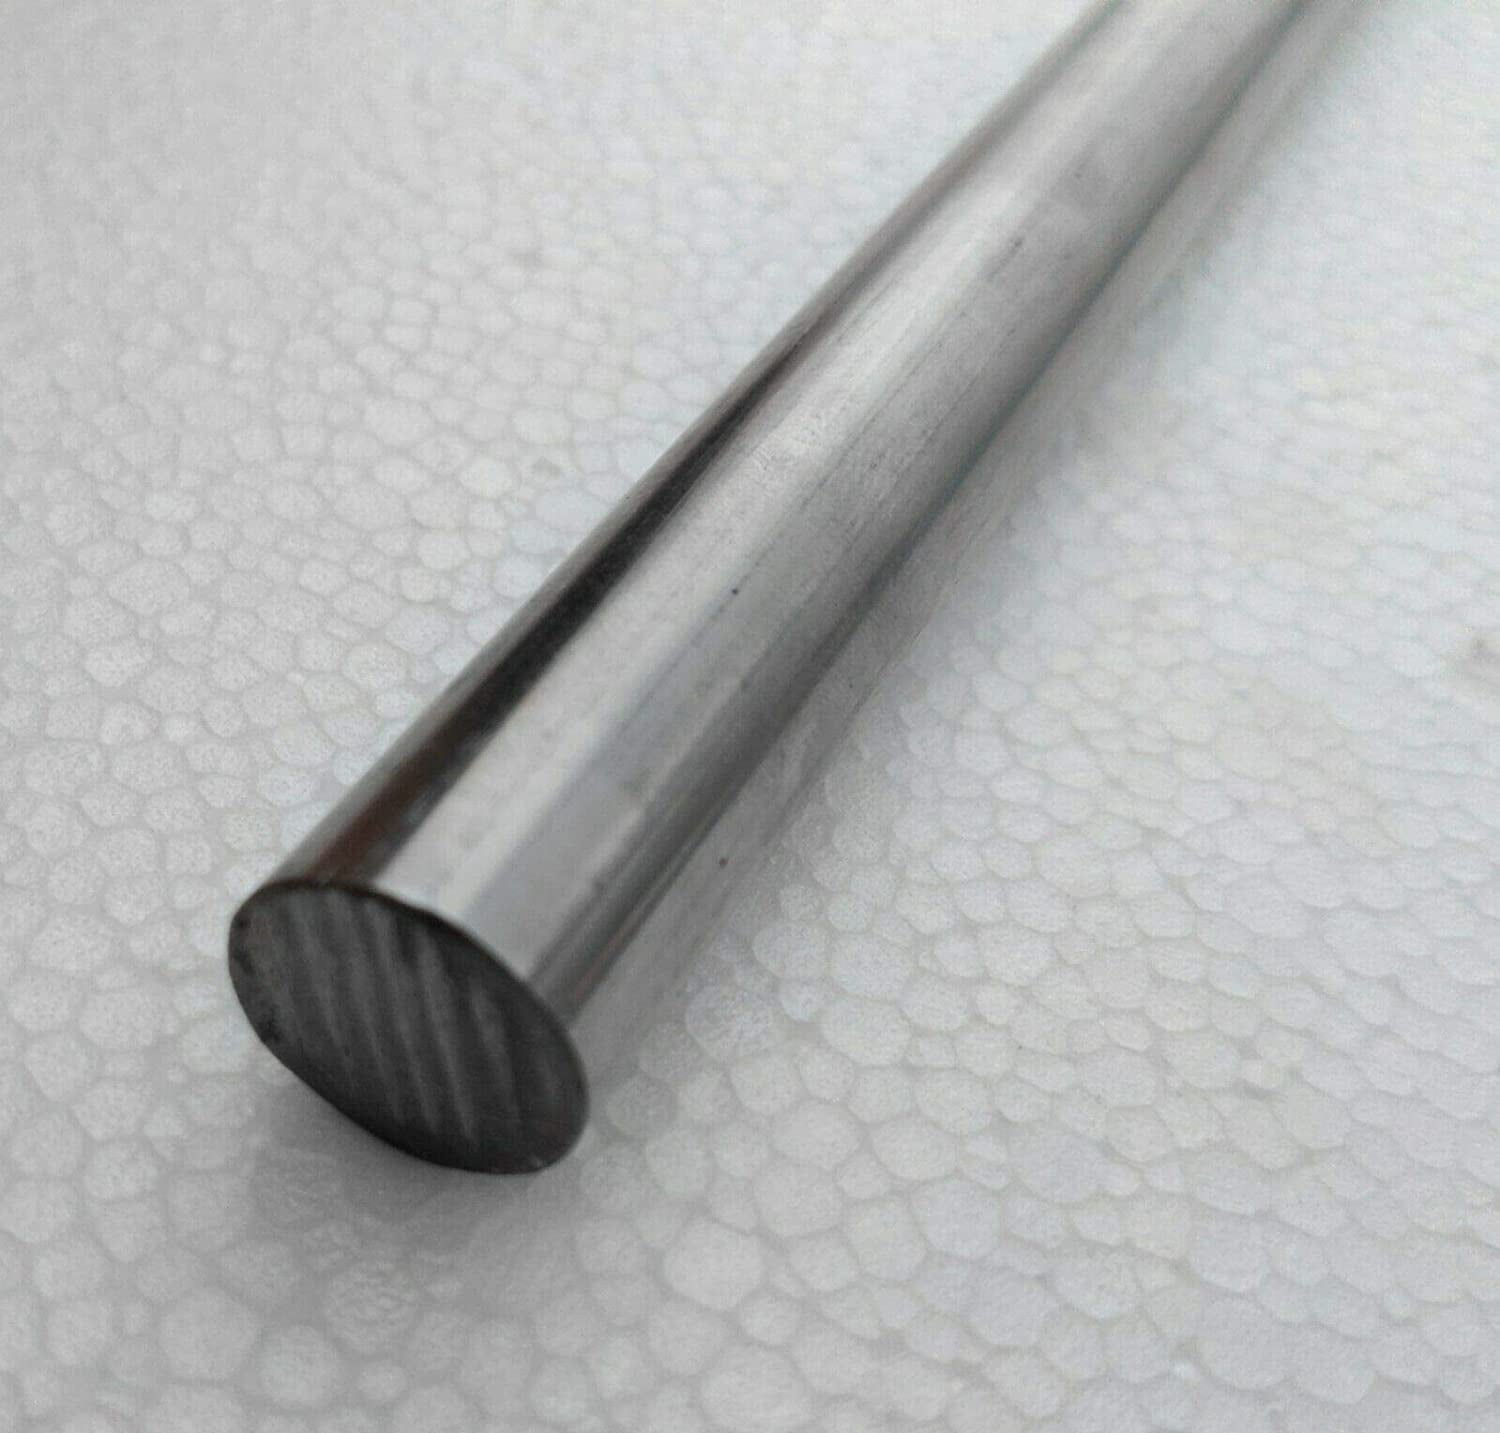 1.750 420 CF Stainless Steel Round Rod x 36 inches 1-3/4 inch